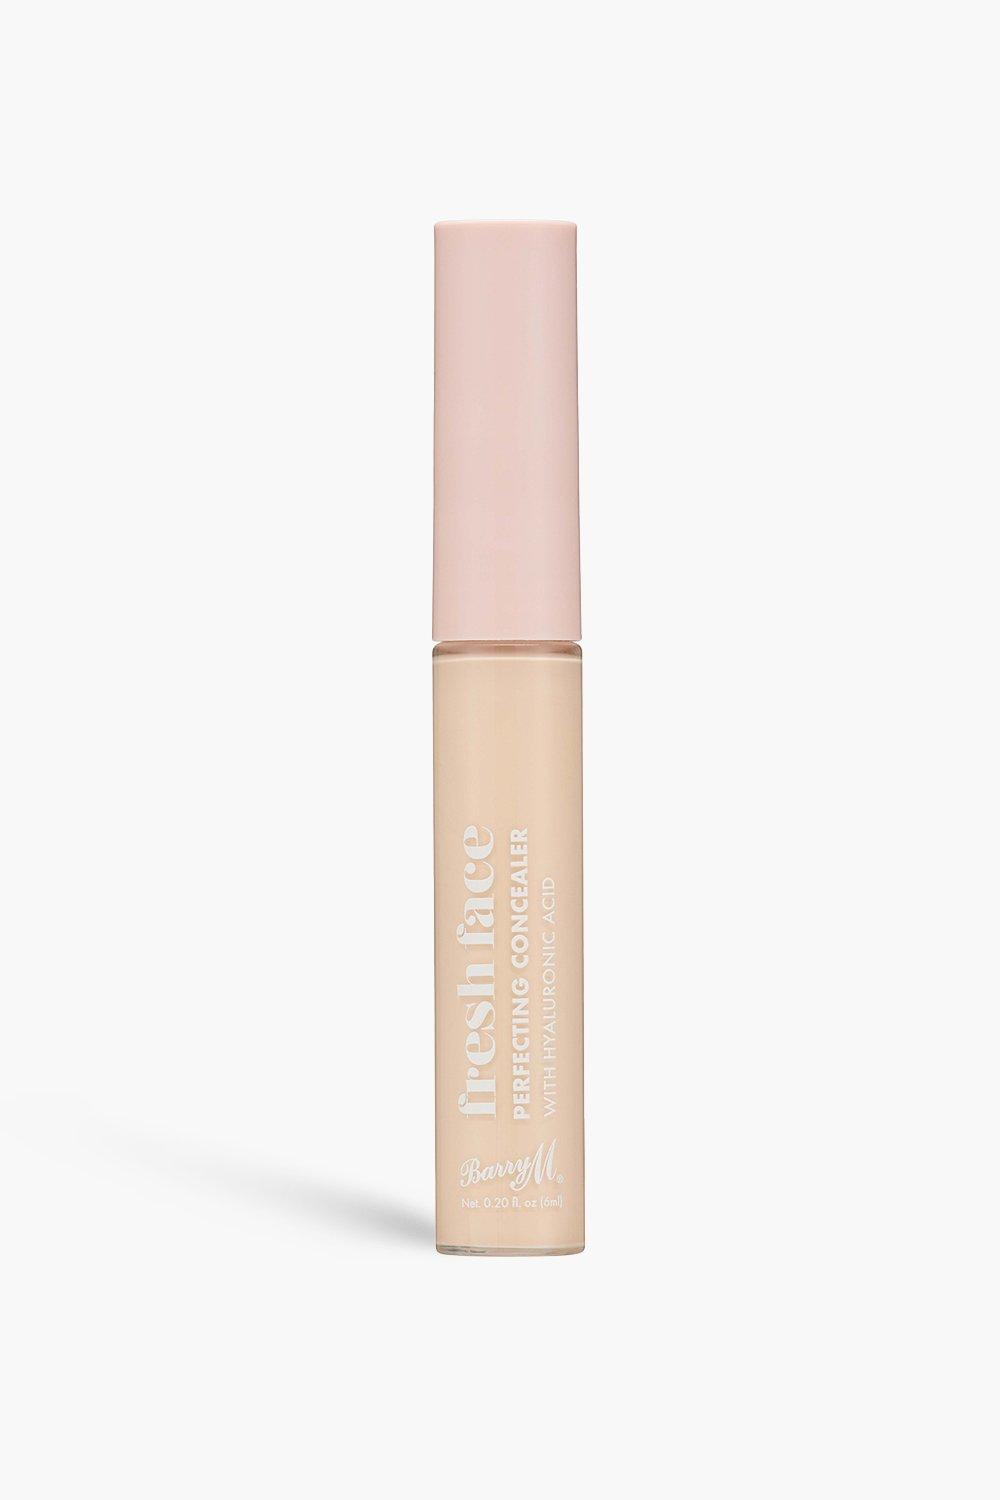 Barry M Fresh Face Perfecting Concealer 1, Cream